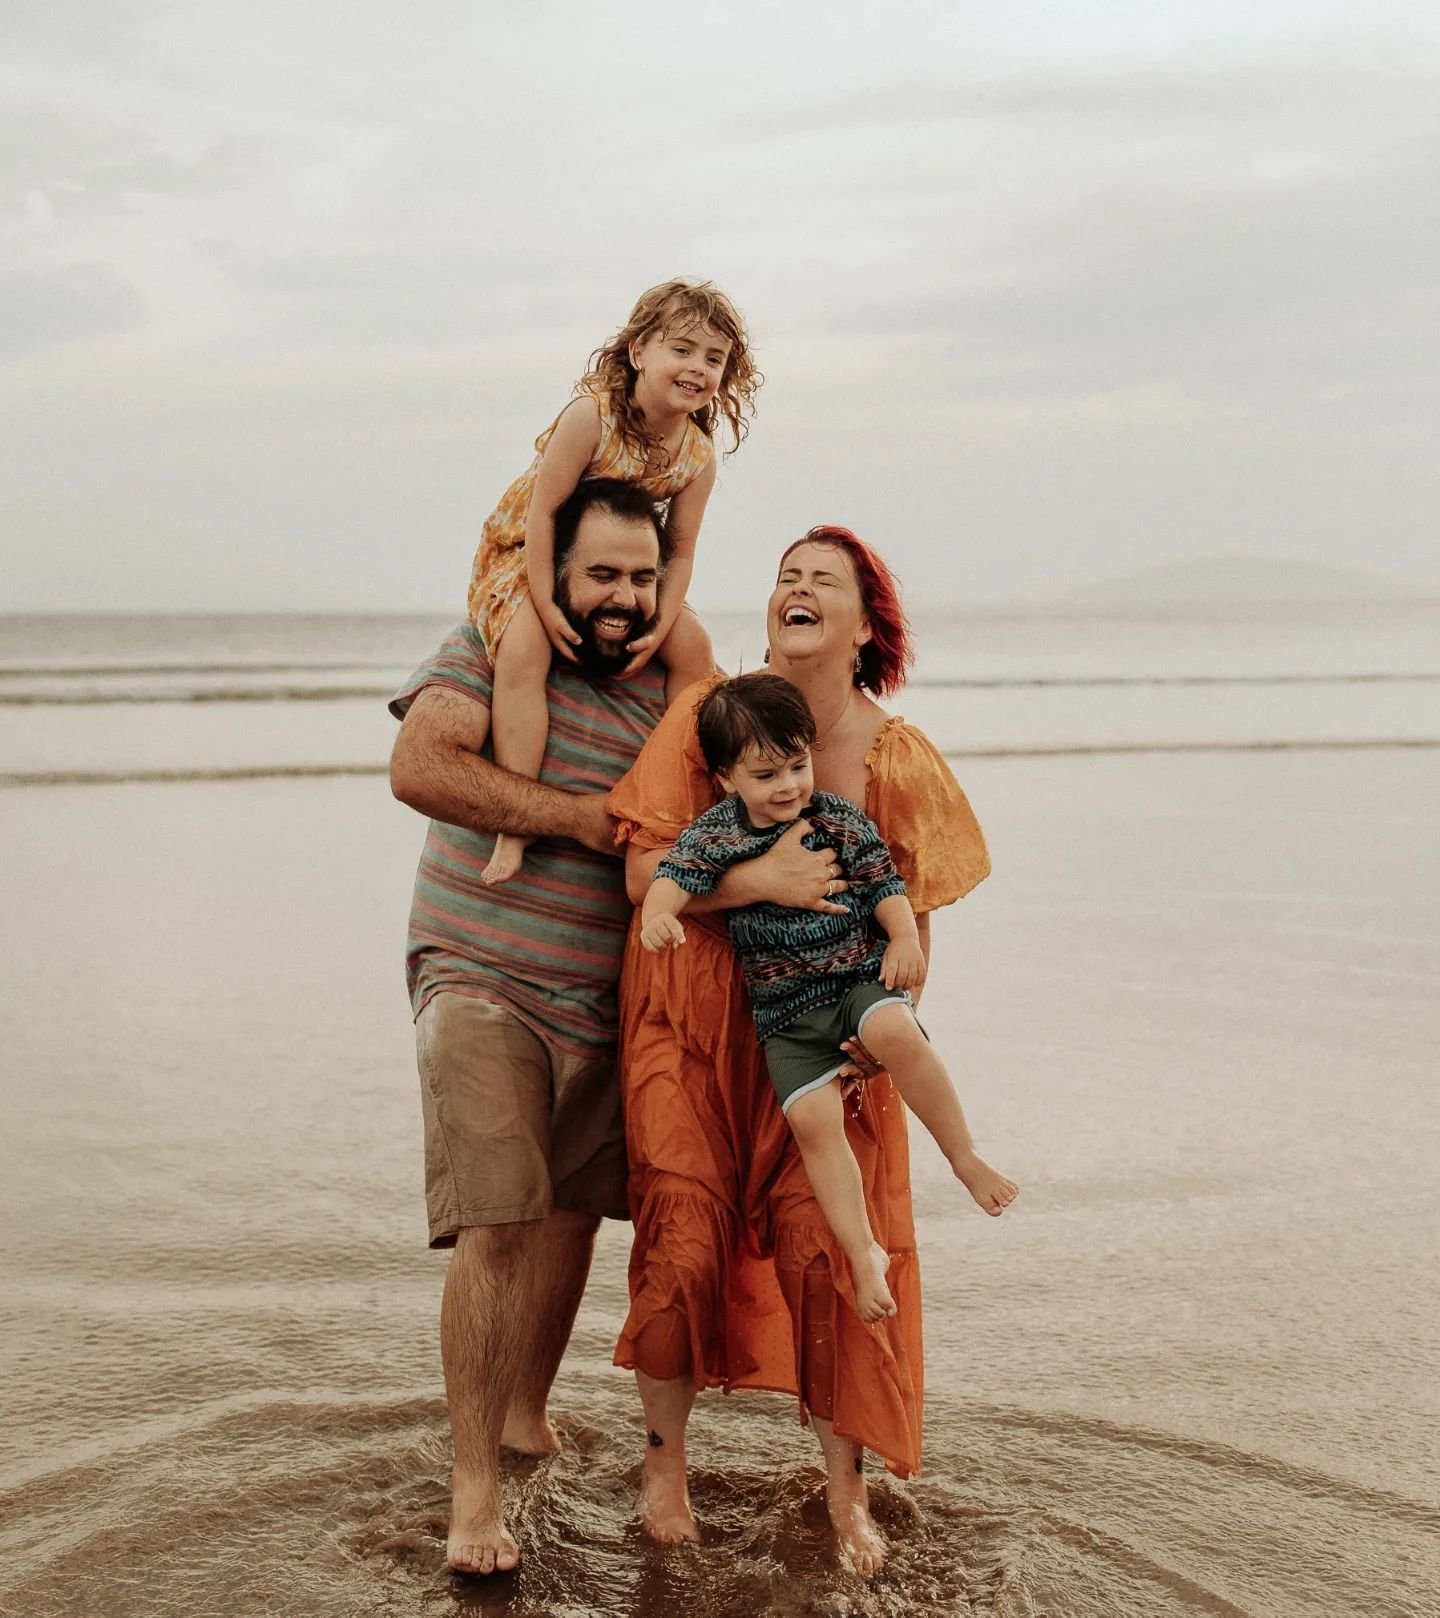 HAPPY Mothers DAY to you all
From my family to yours.

Last time I went to get some family photos done, you can say, it got wild. Before I could even blink my strong willed daughter went in the water, and of course her loving brother followed. We wen